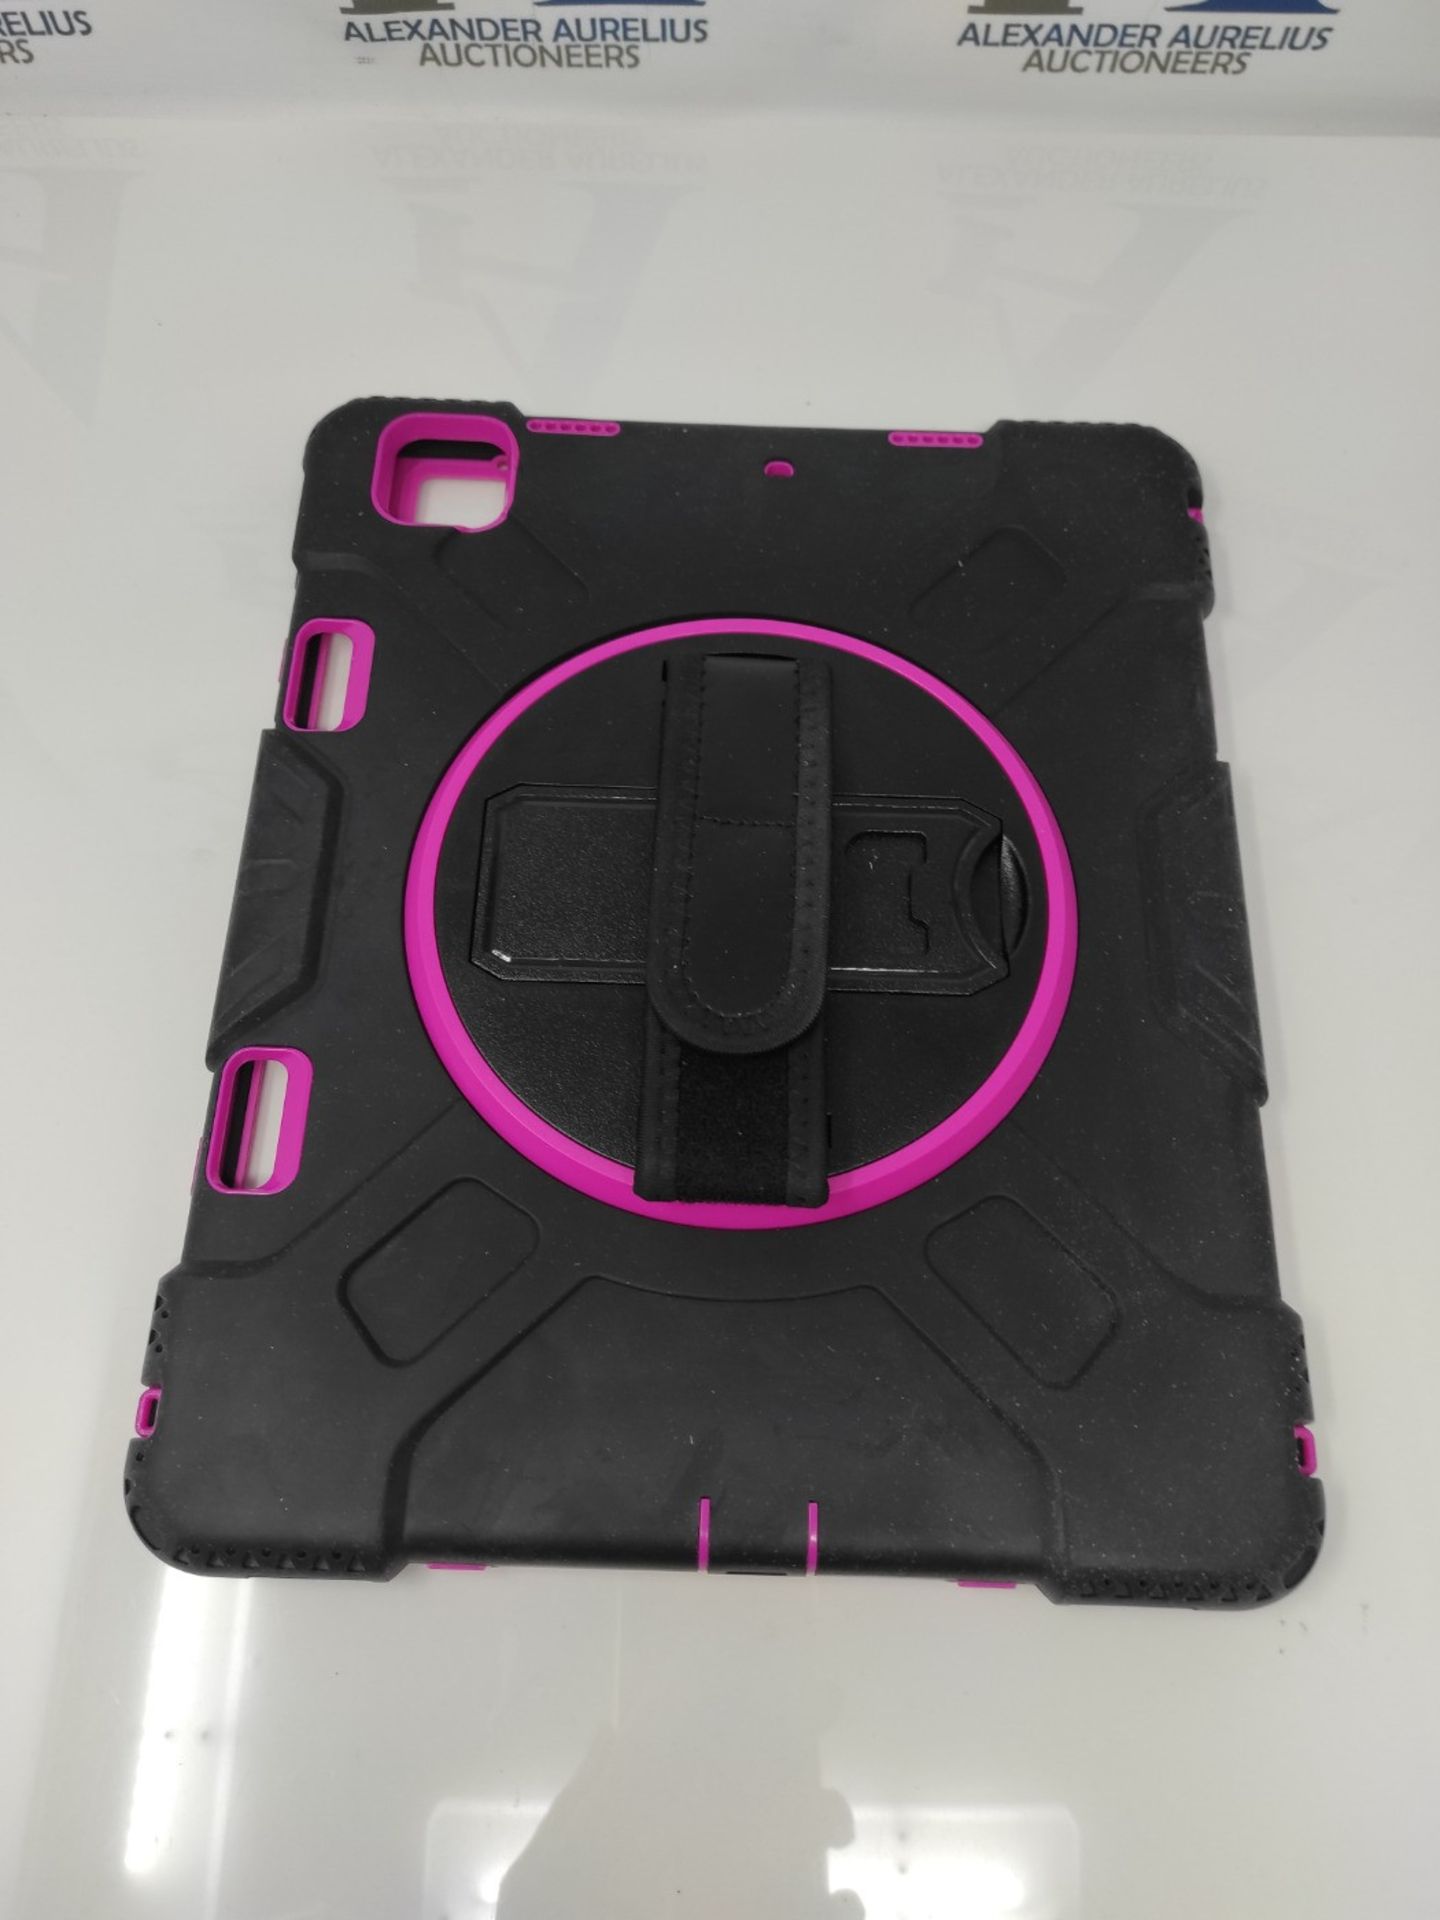 Case for iPad Pro 12.9 Inch (5th/4th/3rd Generation, 2021/2020/2018), Full Protective - Image 3 of 3